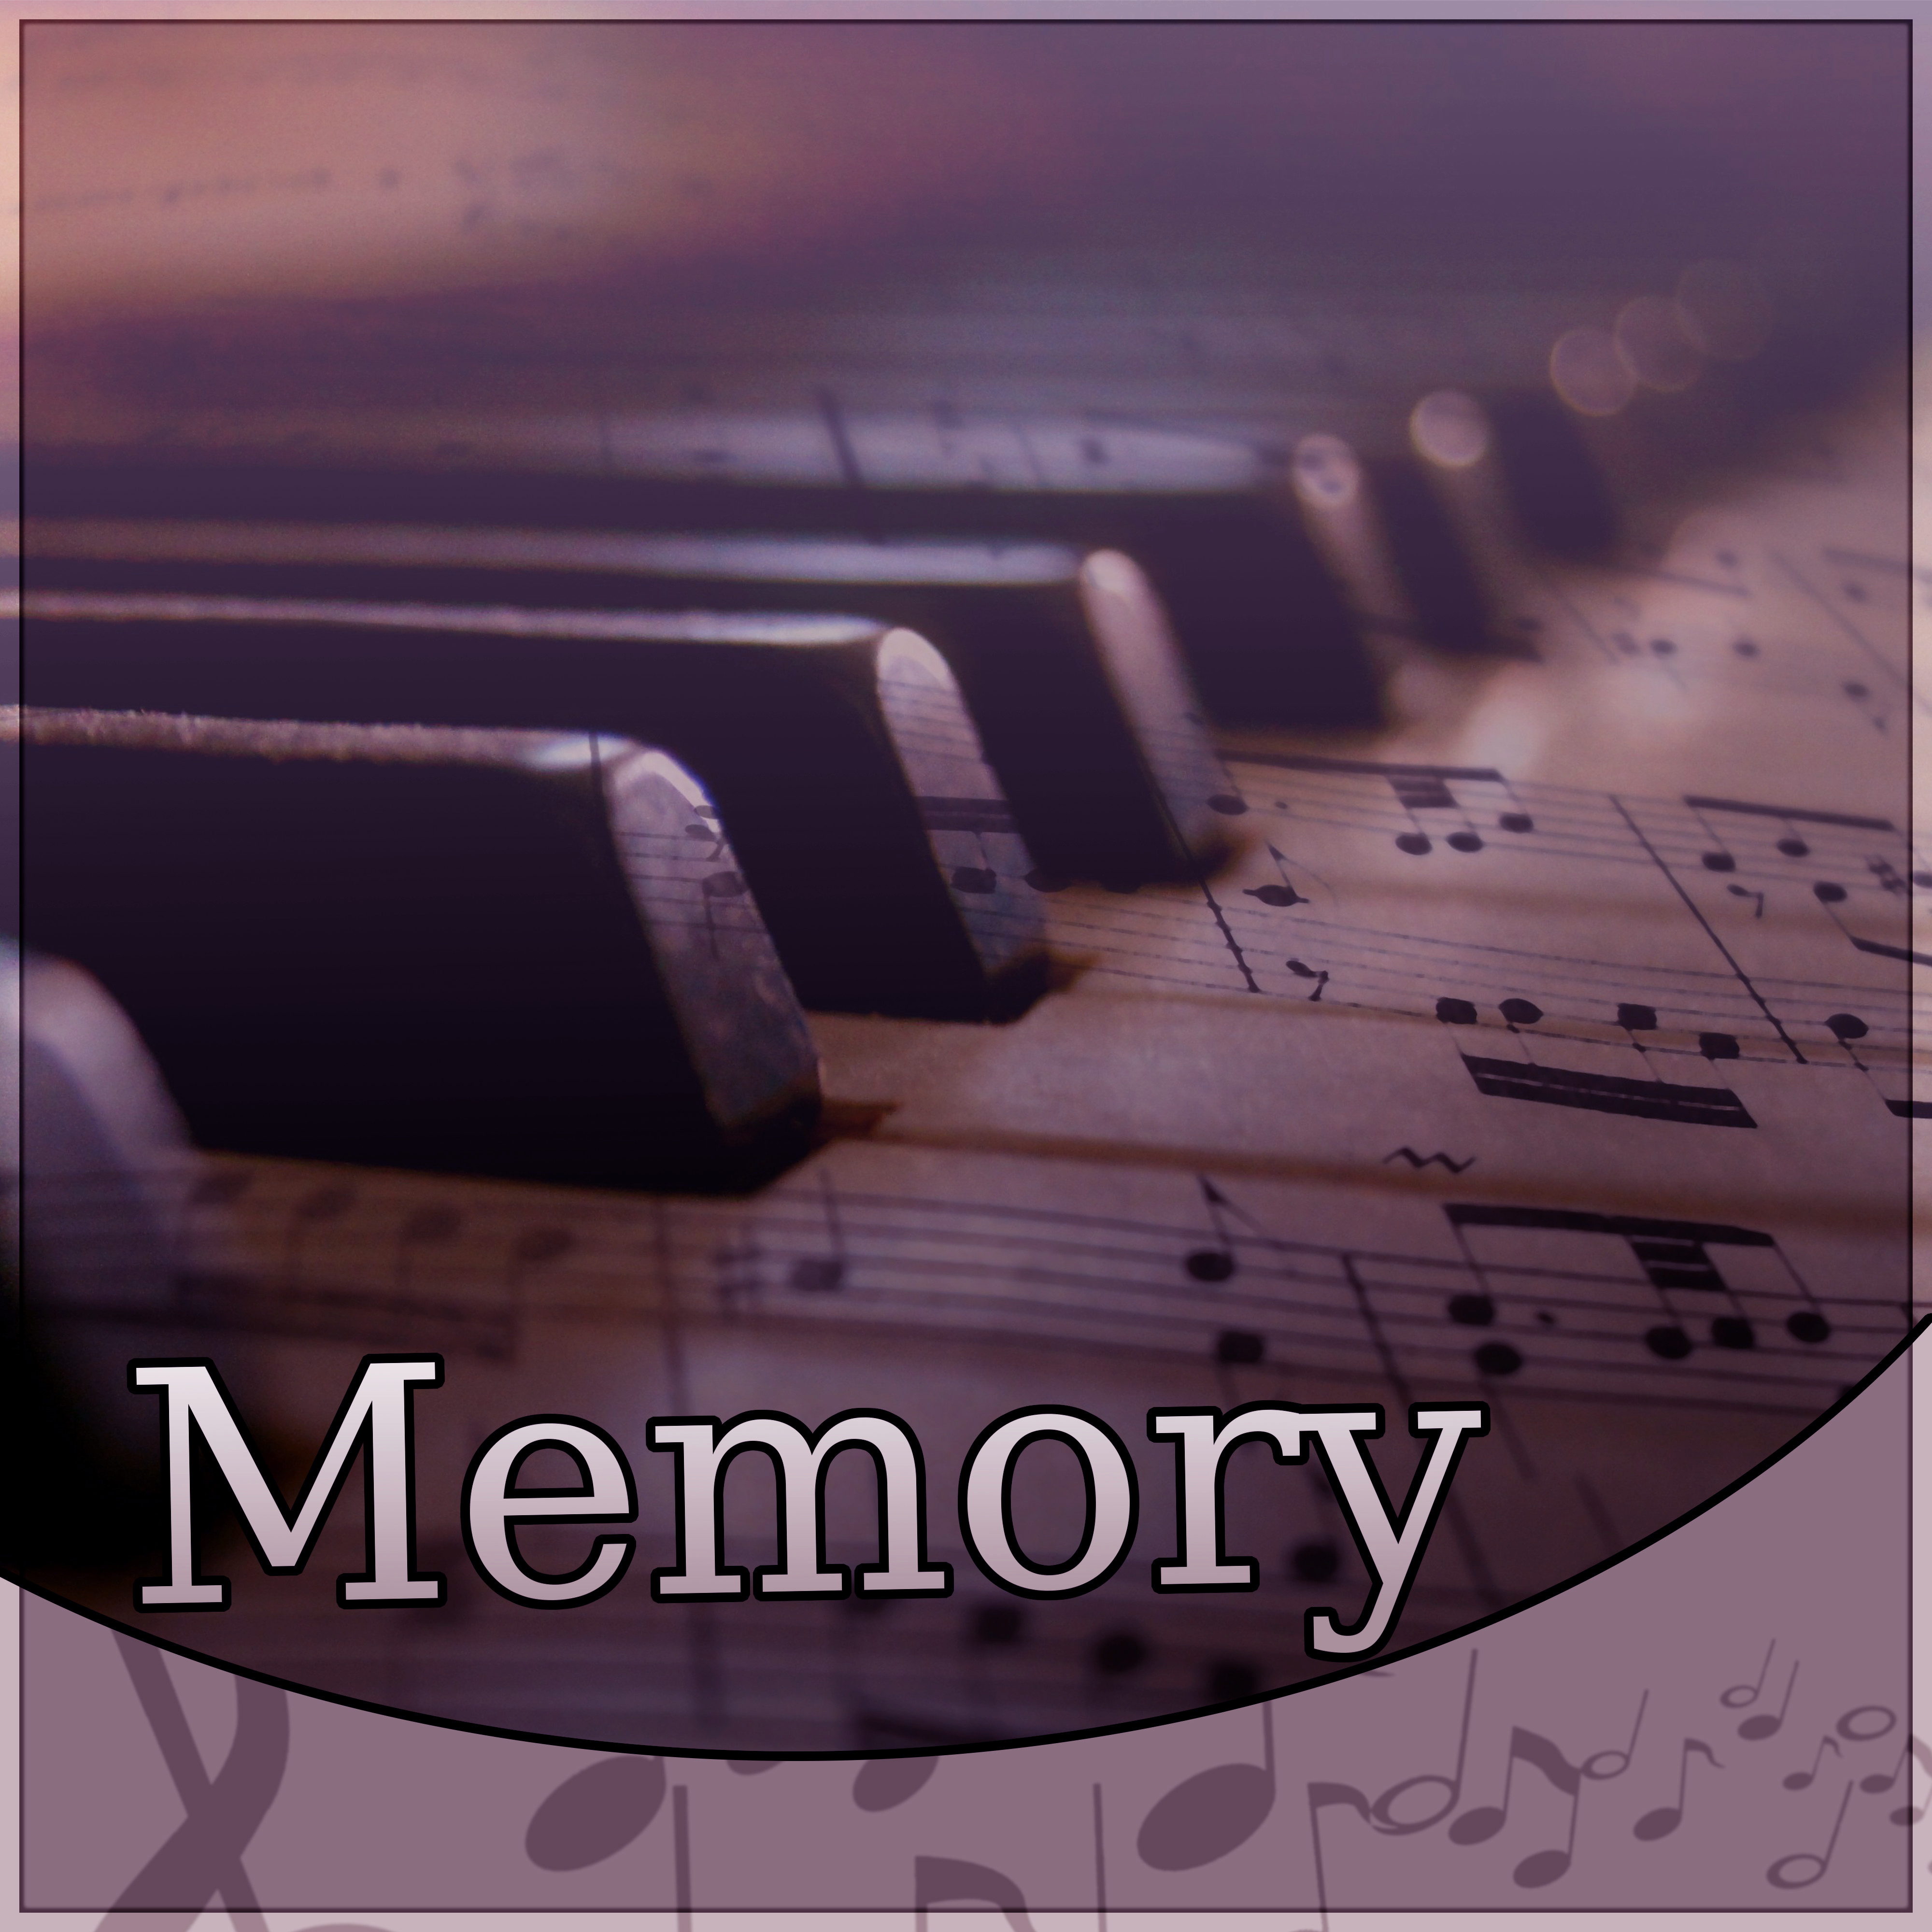 Memory  Instrumental Sad Songs, Romantic Background Music, Sentimental Music to Cry, Reflective Music for Broken Heart, Sad Piano Love Songs, Sentimental Journey